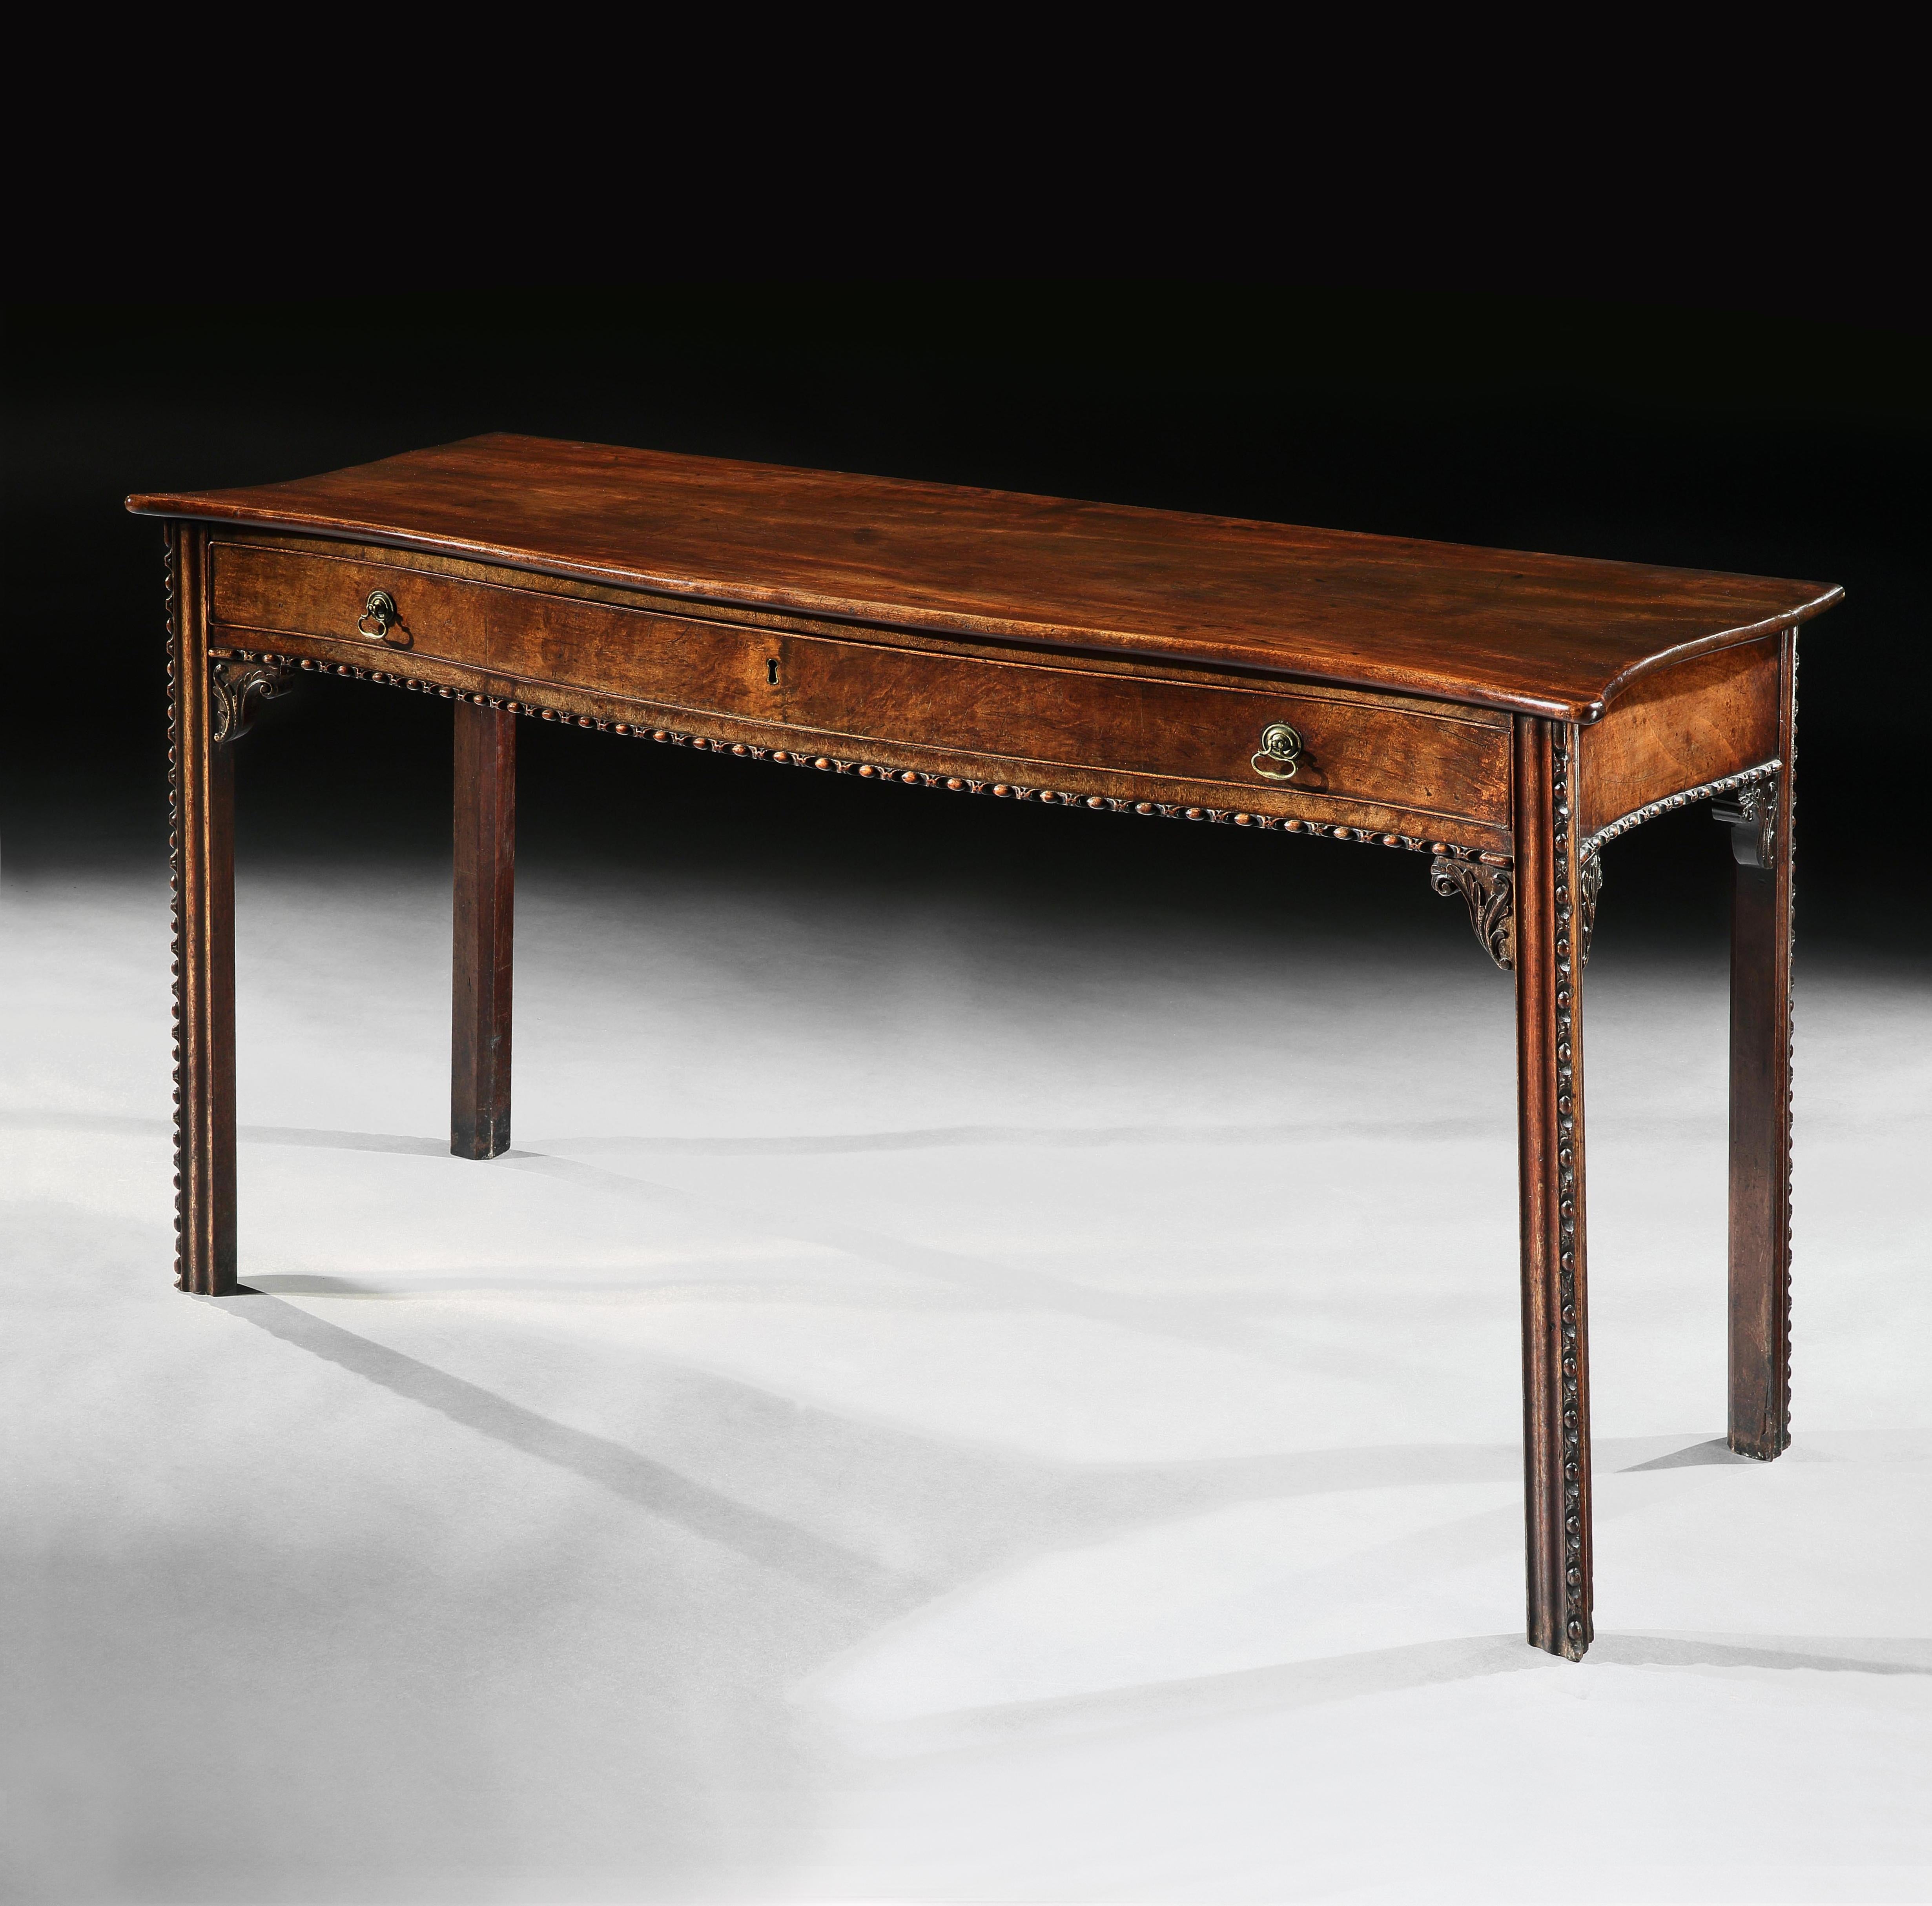 A fine and elegant mid-18th century Chippendale period mahogany serpentine side table with single drawer, retaining a wonderful color and patination, possibly by Wright & Elwick. 

English George III period, circa 1760.

The well chosen, figured